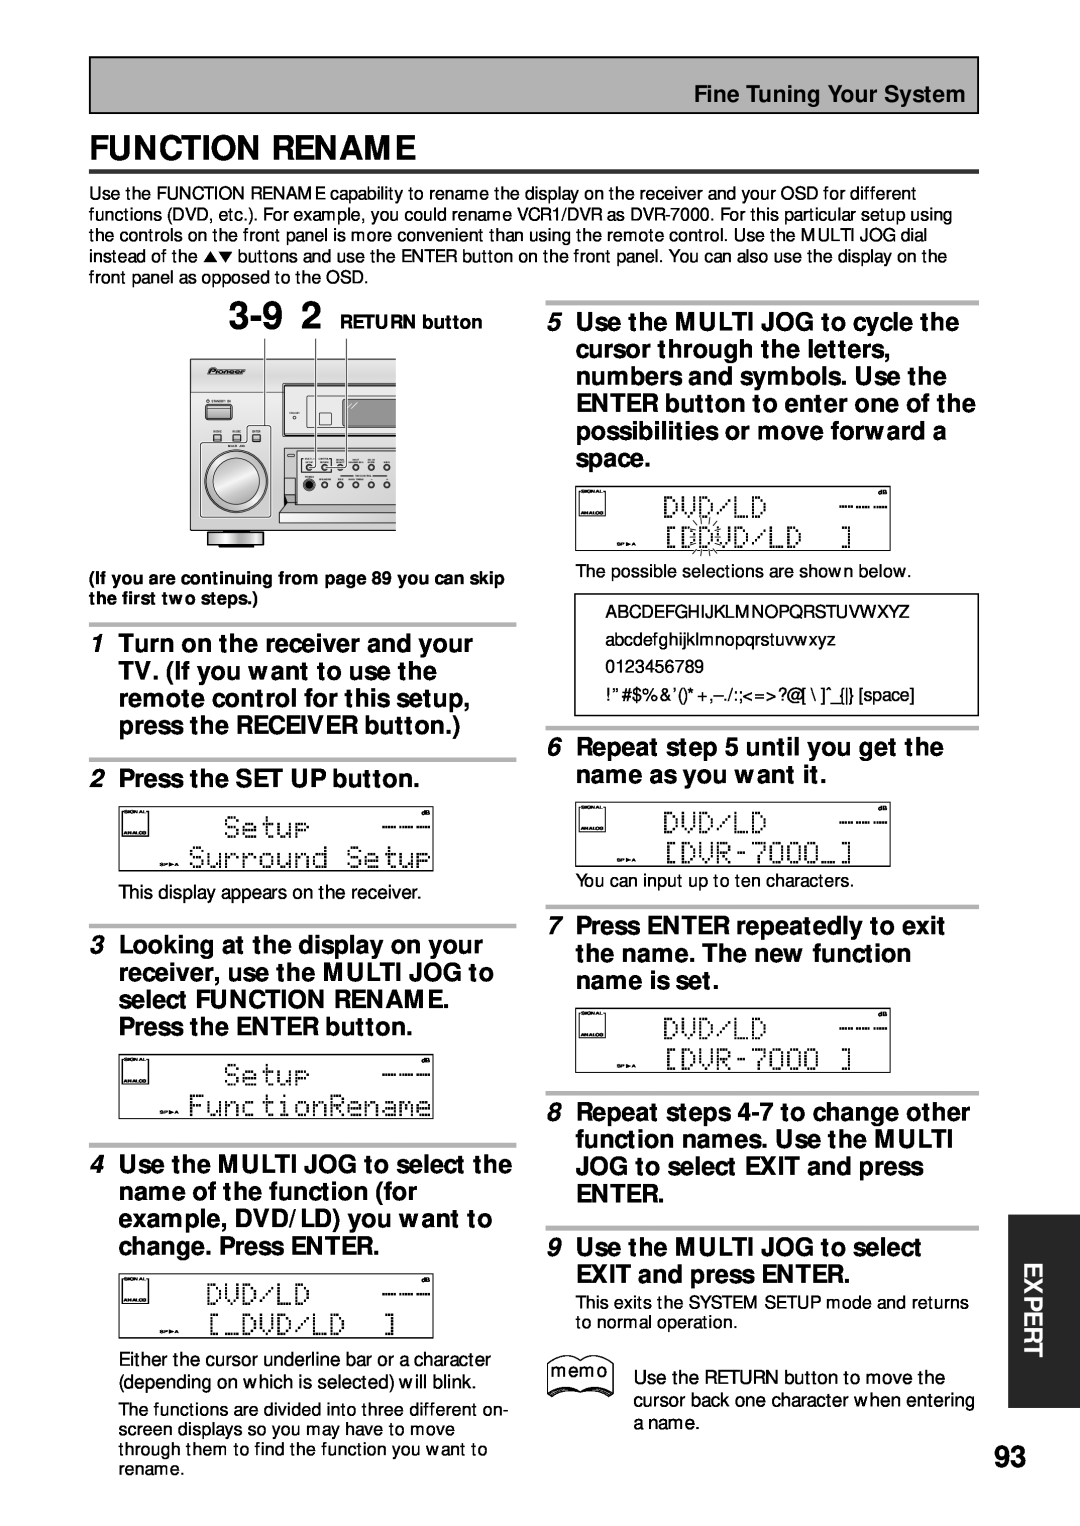 Pioneer VSX-45TX Function Rename, Use the MULTI JOG to cycle the, cursor through the letters, numbers and symbols. Use the 